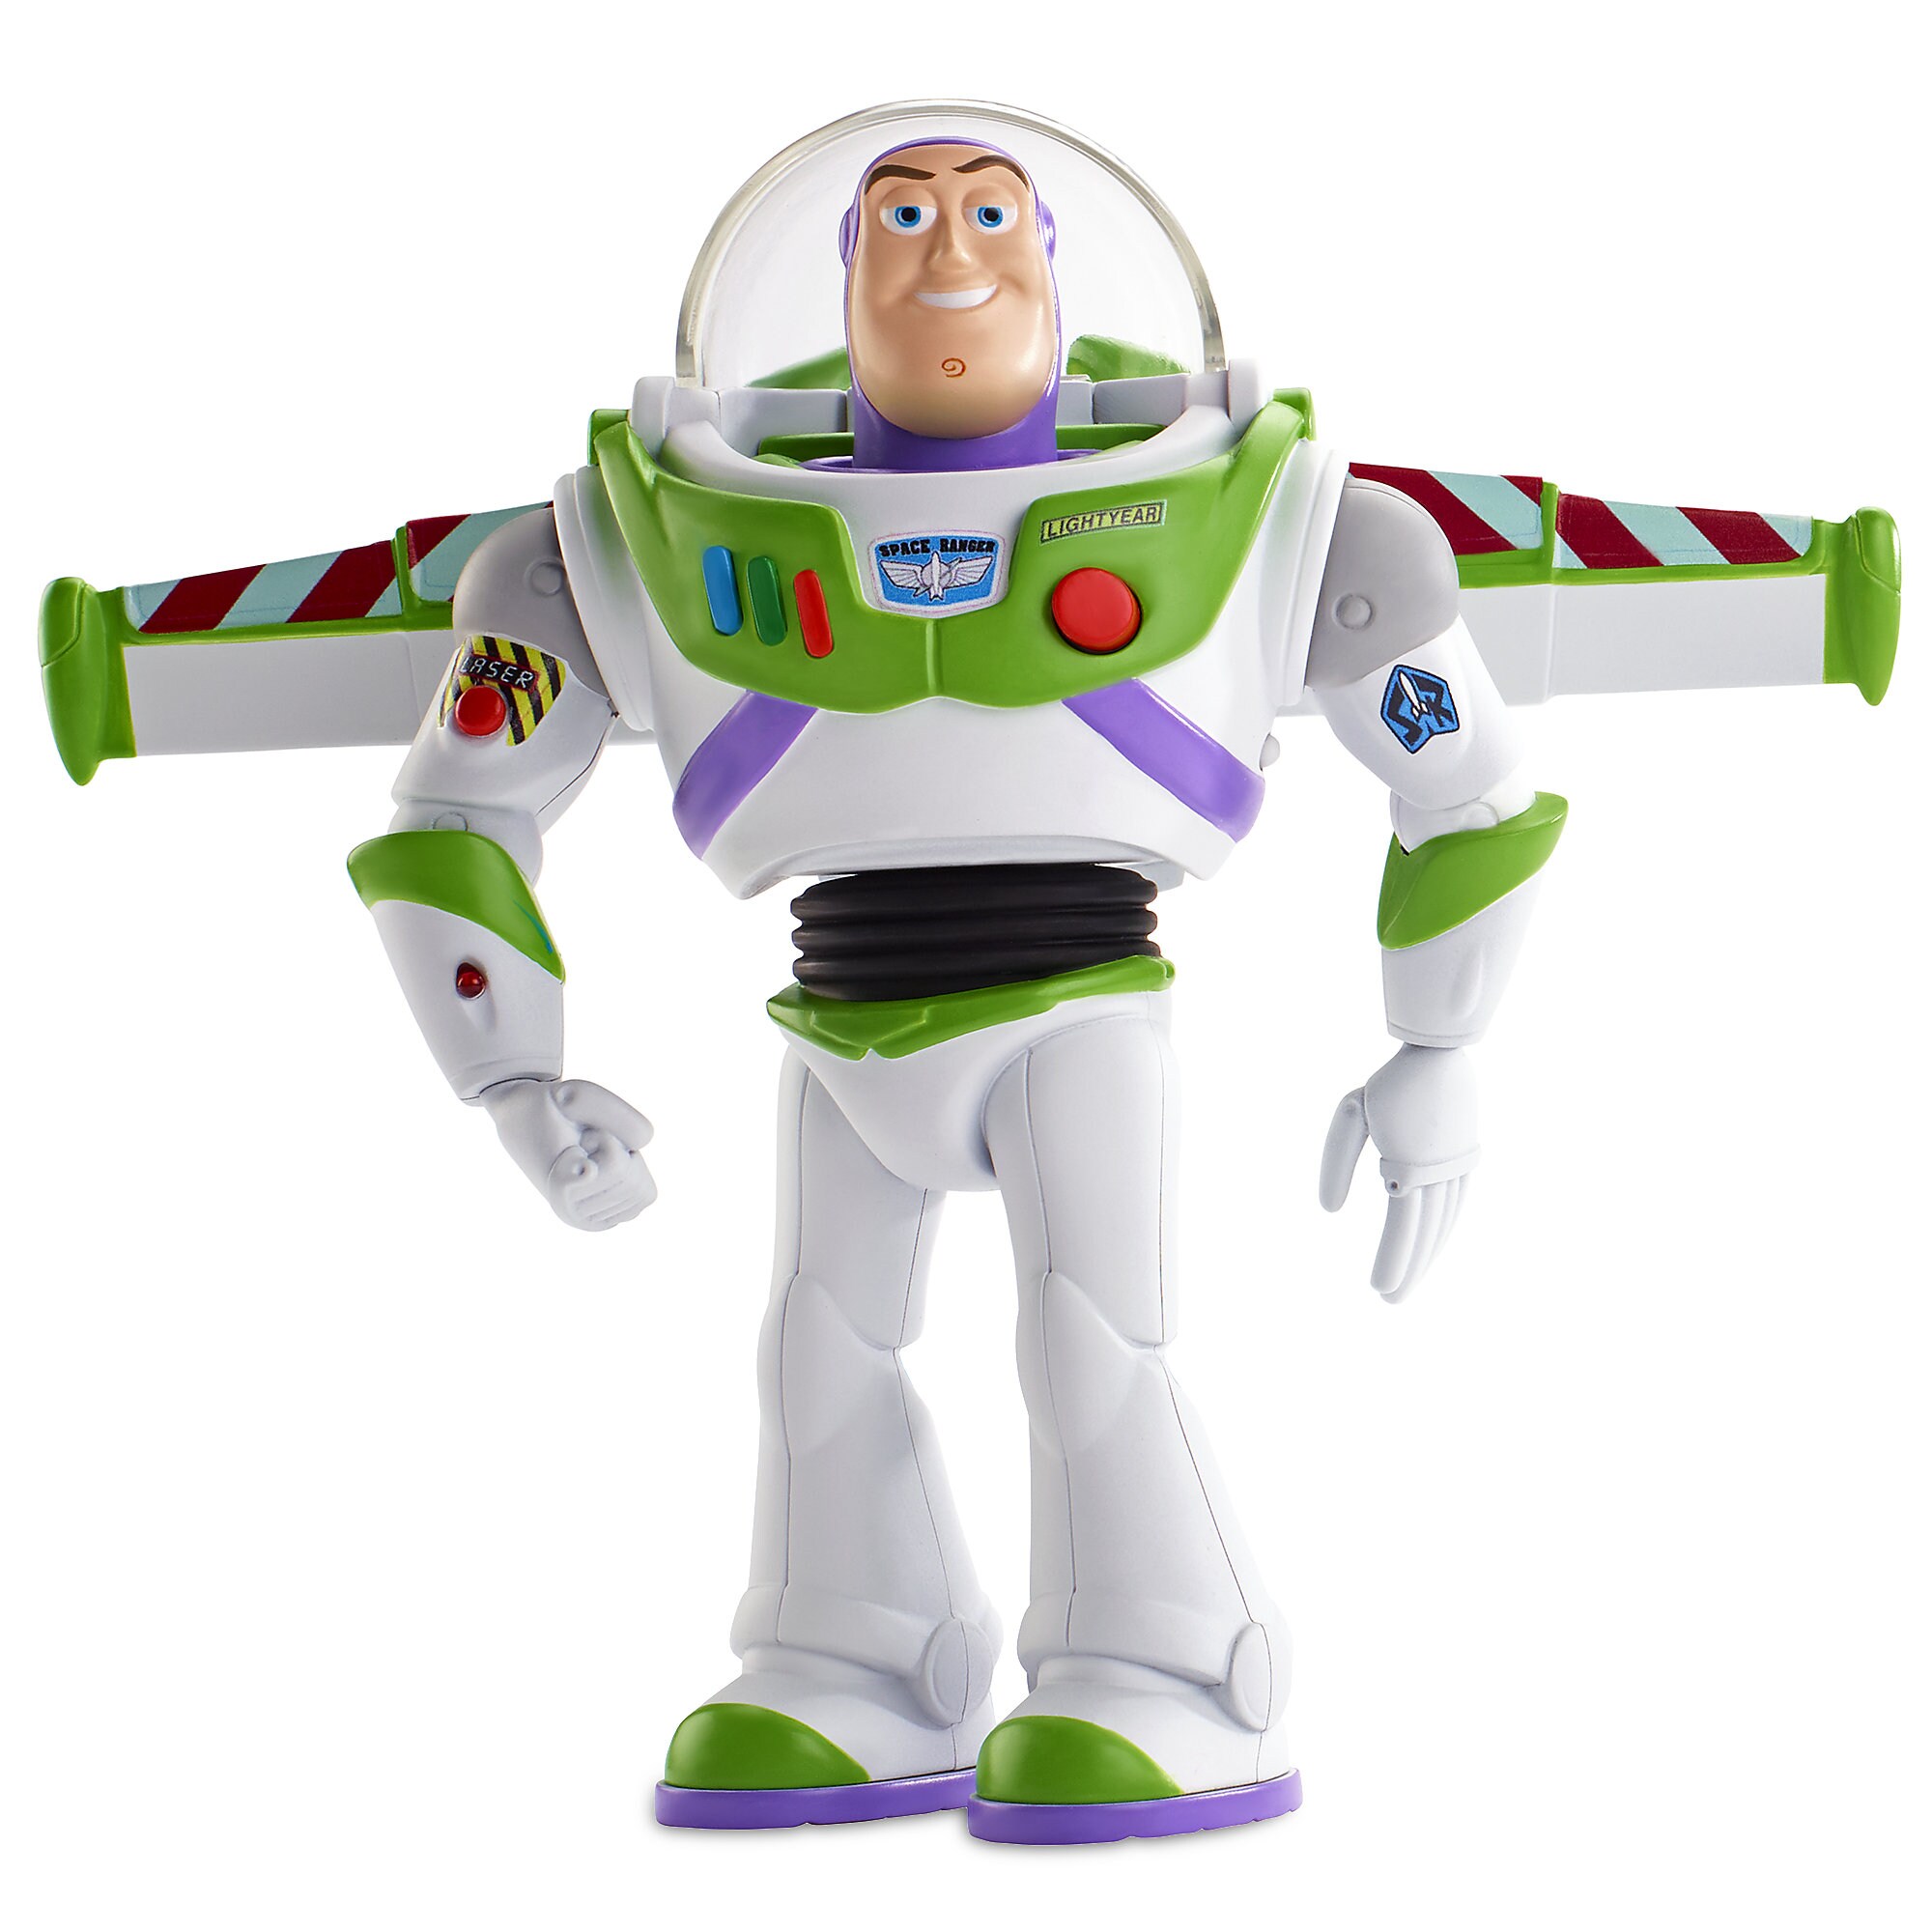 Buzz Lightyear Ultimate Action Figure - 7'' - Toy Story 4